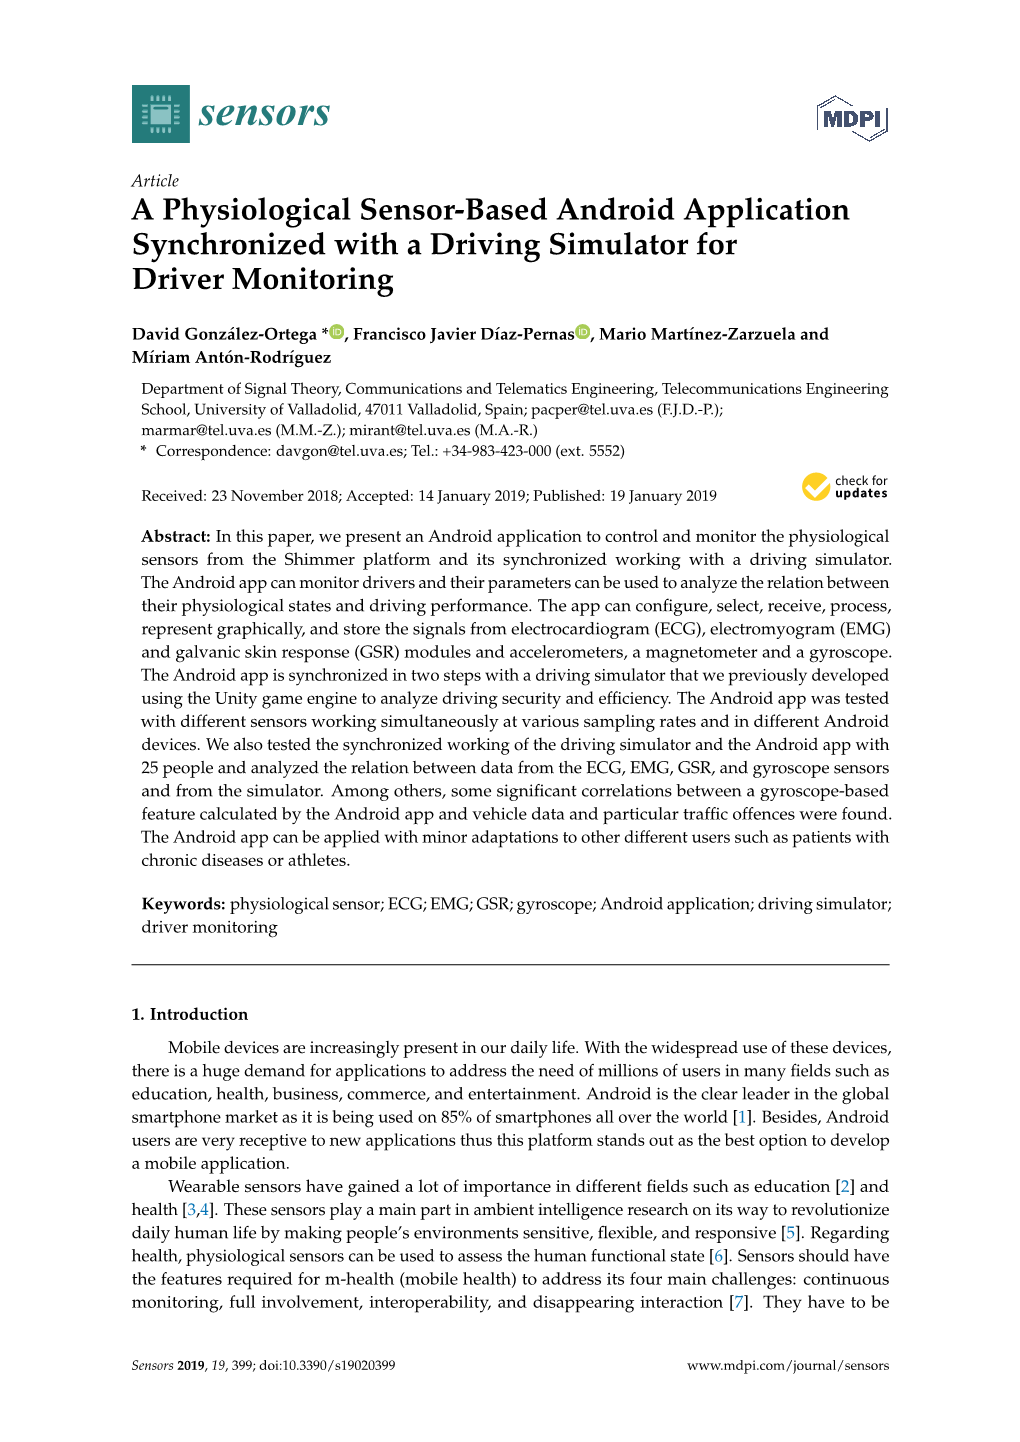 A Physiological Sensor-Based Android Application Synchronized with a Driving Simulator for Driver Monitoring